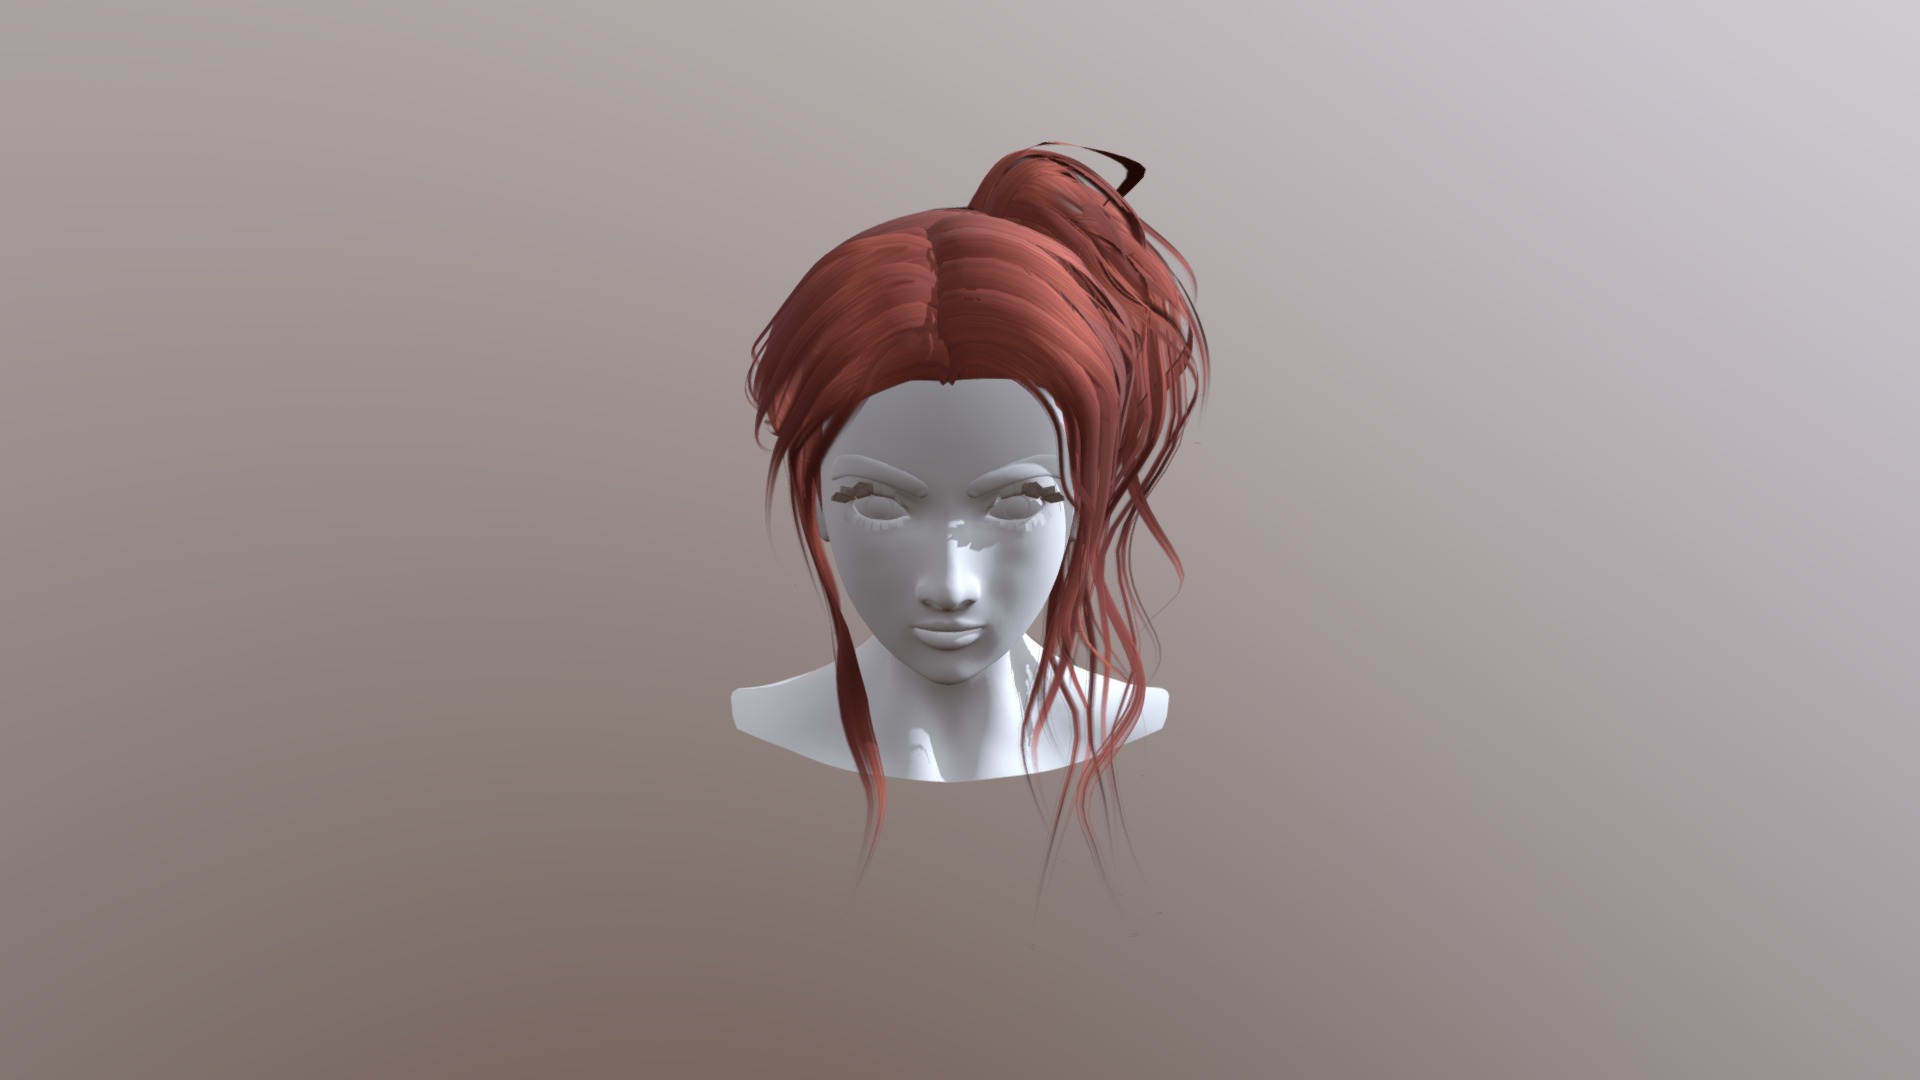 3D model Pocolov Hair 04 - This is a 3D model of the Pocolov Hair 04. The 3D model is about a woman's head with red hair.